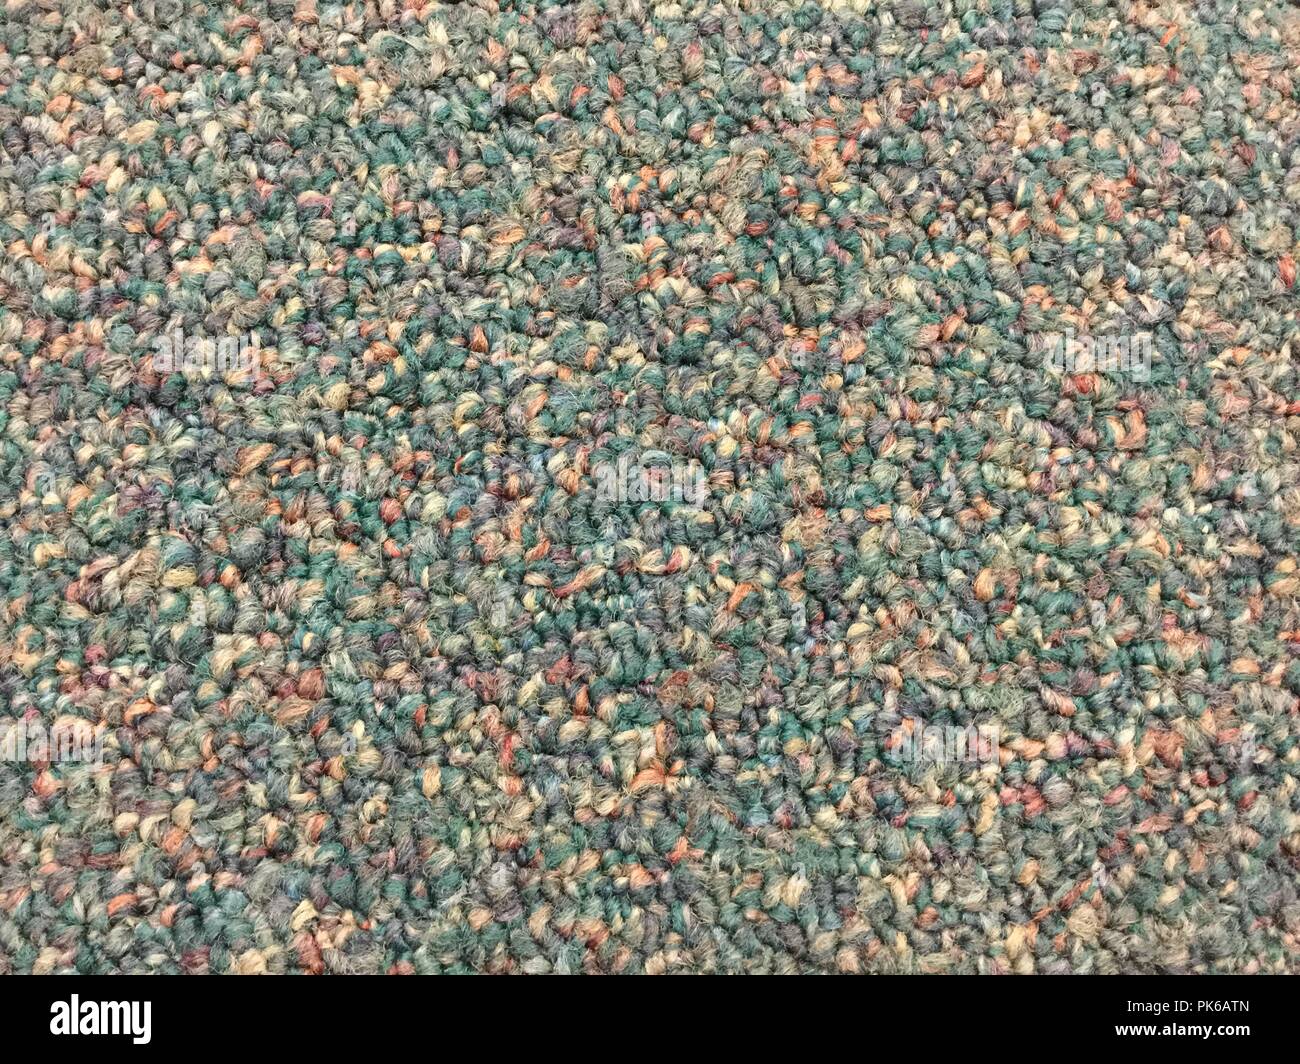 Closeup of carpet showing colors and textures. Stock Photo